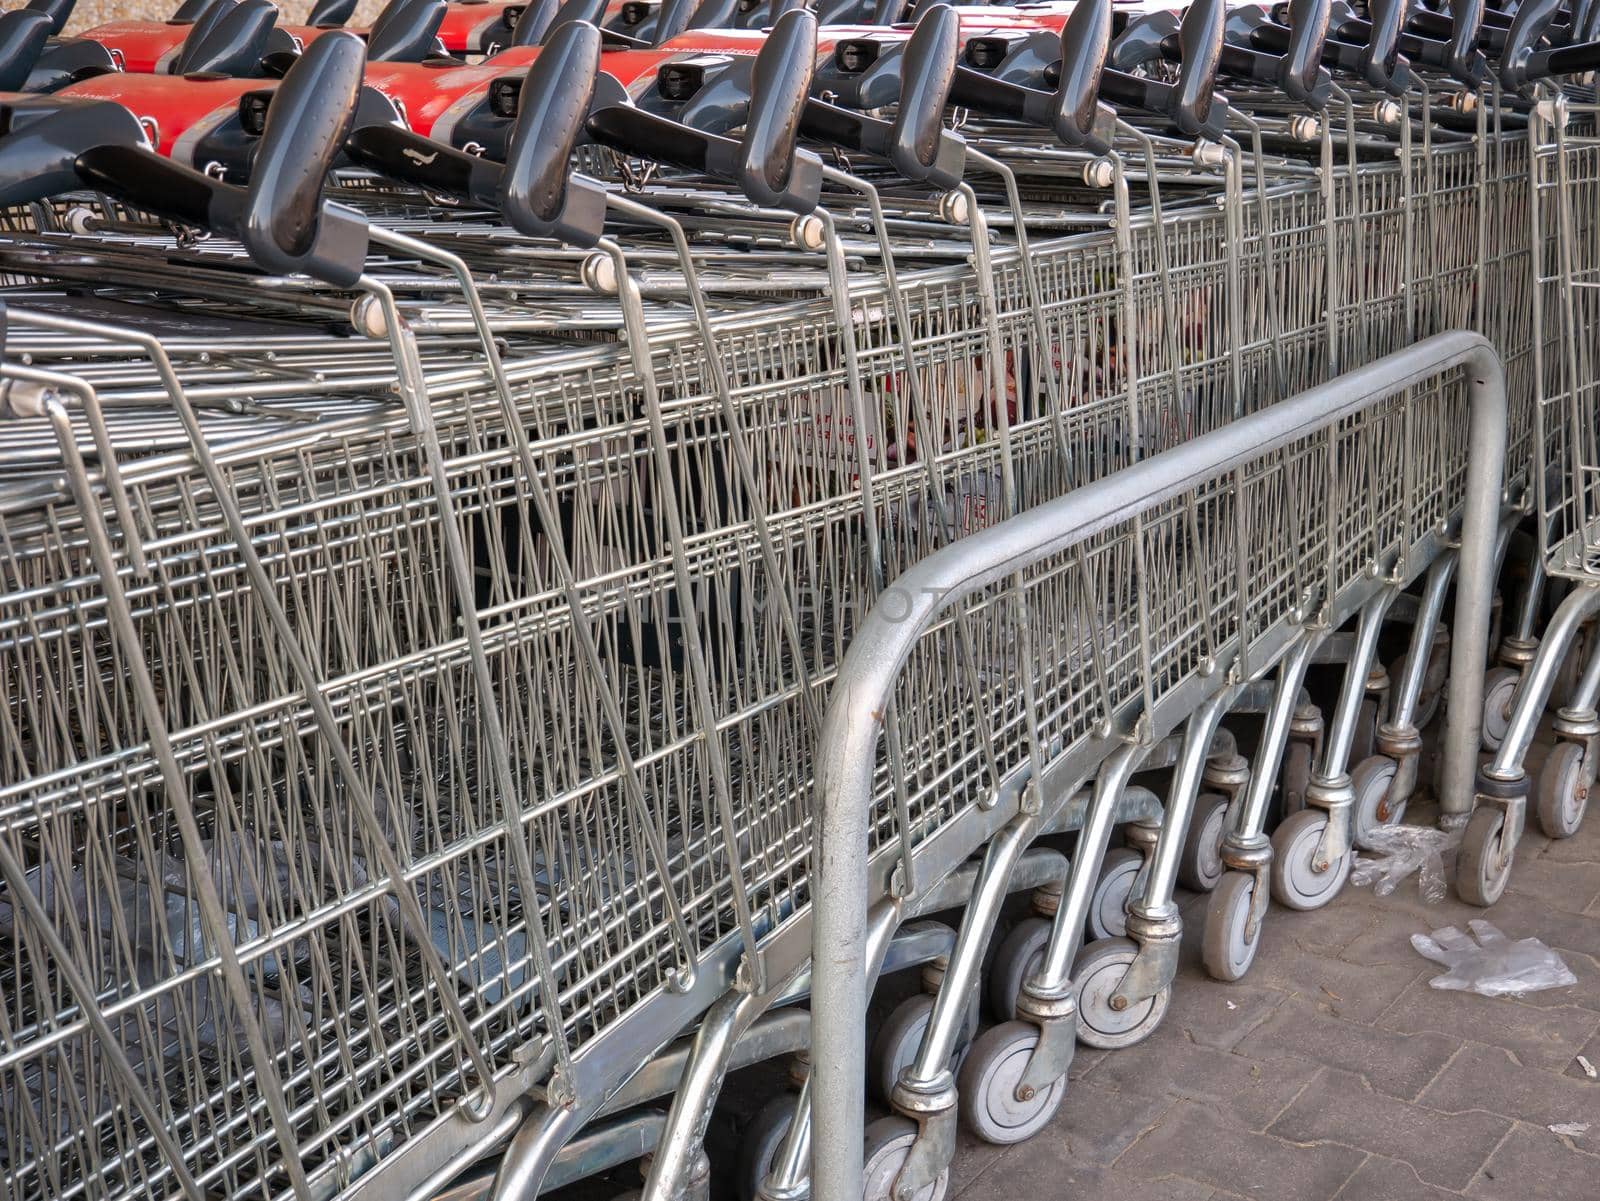 Row of stacked metal shopping trolley carts by harukoro